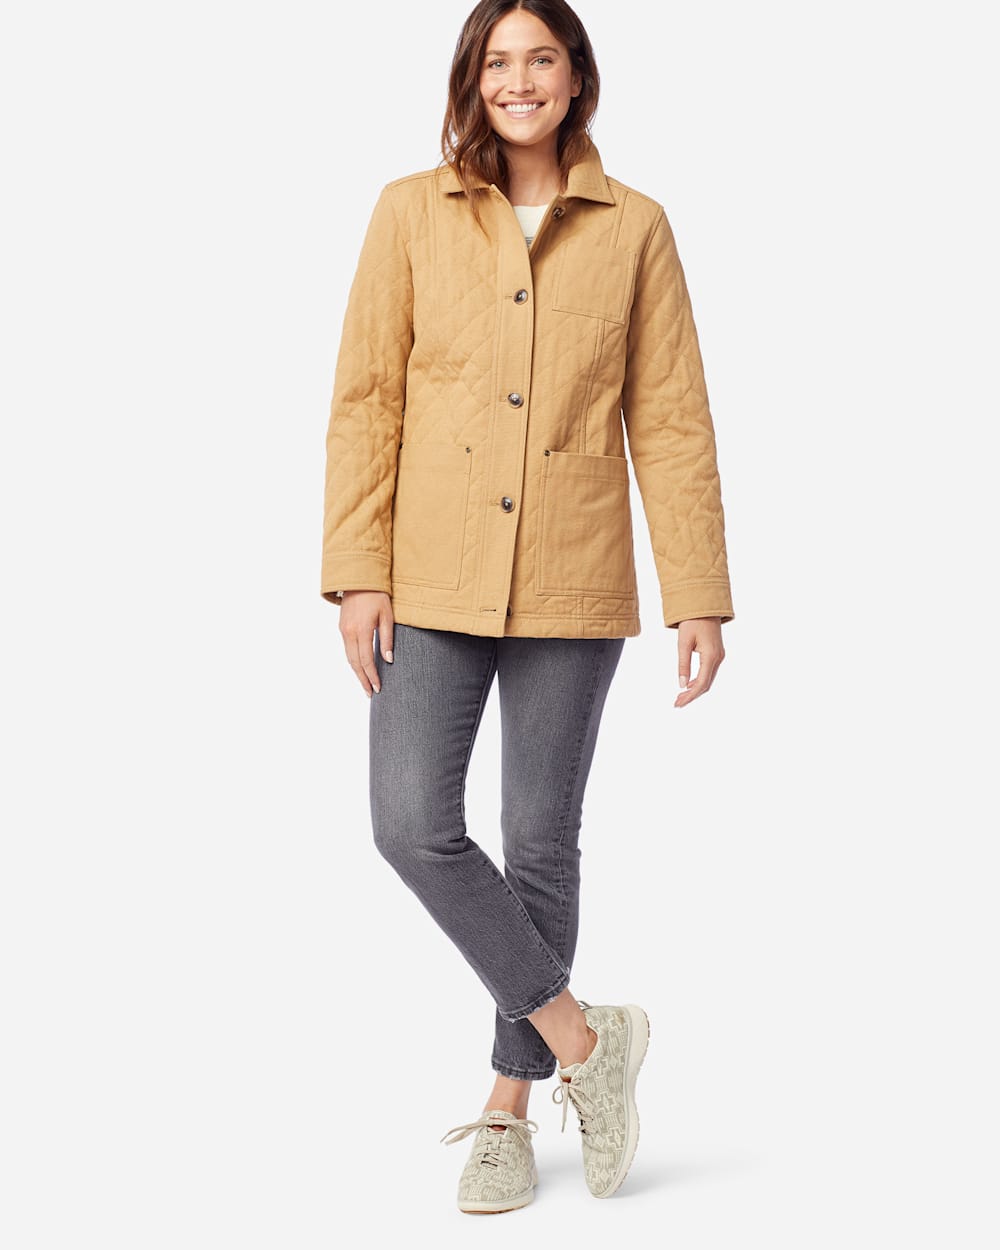 ALTERNATE VIEW OF WOMEN'S FERN QUILTED CANVAS BARN COAT IN CHAMOIS image number 2